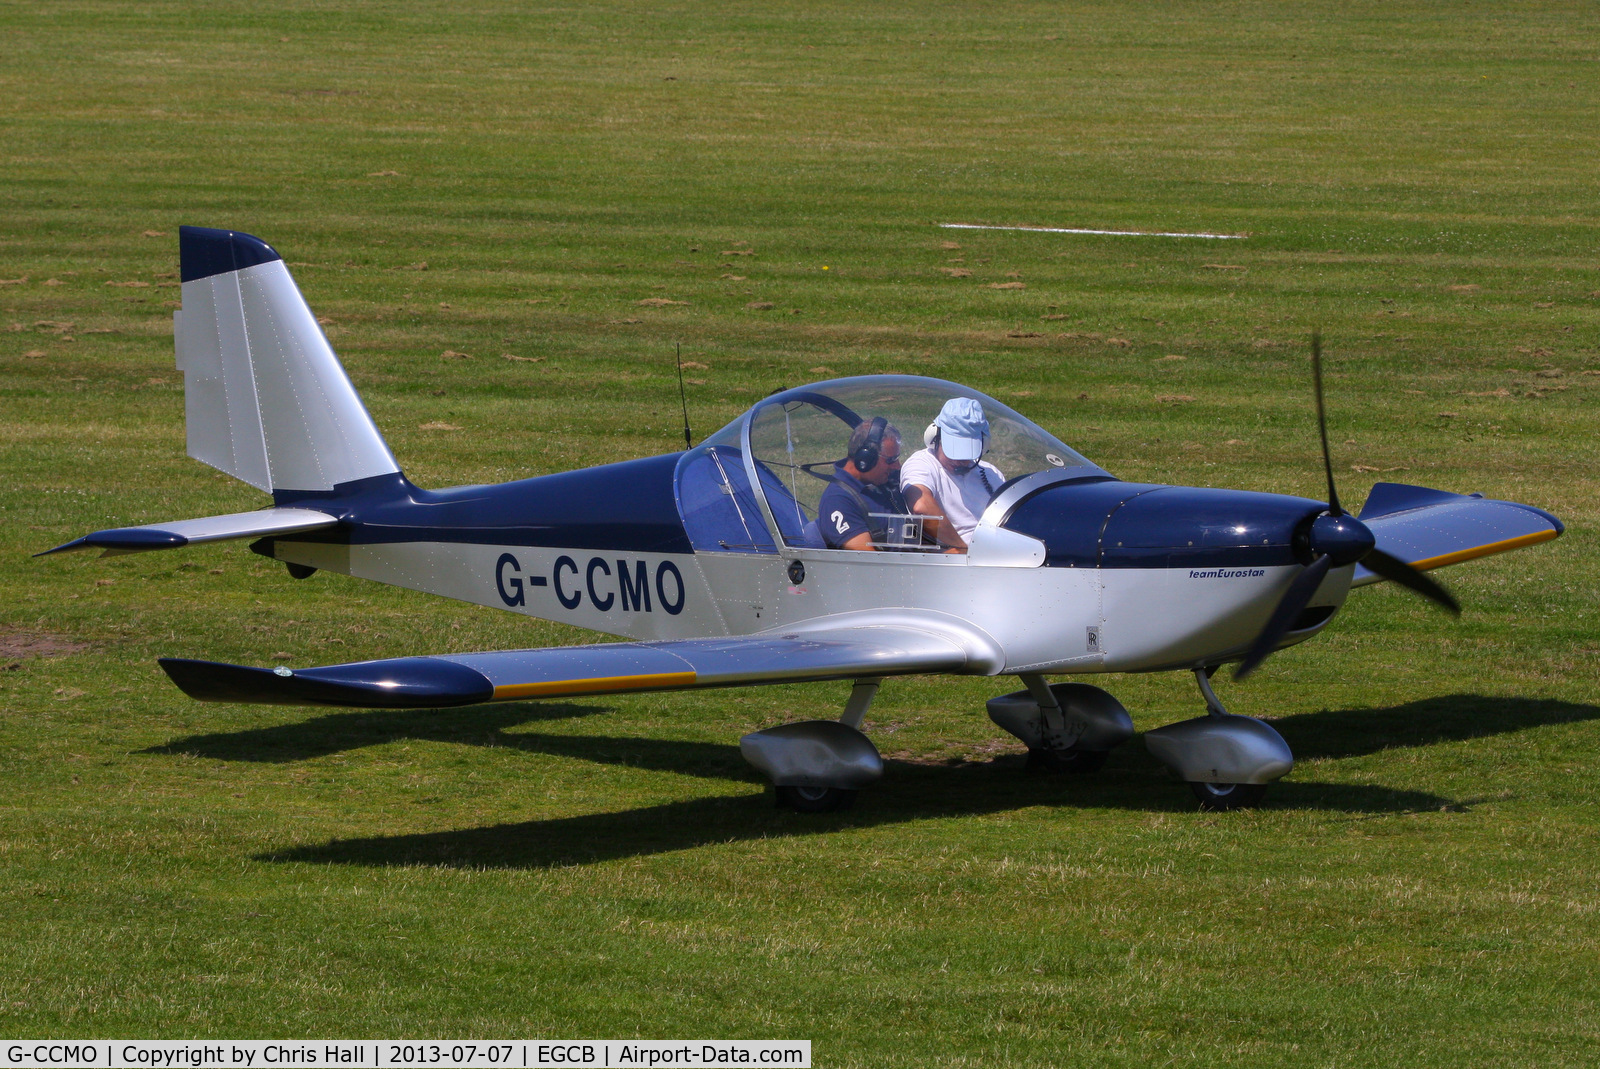 G-CCMO, 2003 Aerotechnik EV-97A Eurostar C/N PFA 315-14155, at the Barton open day and fly in